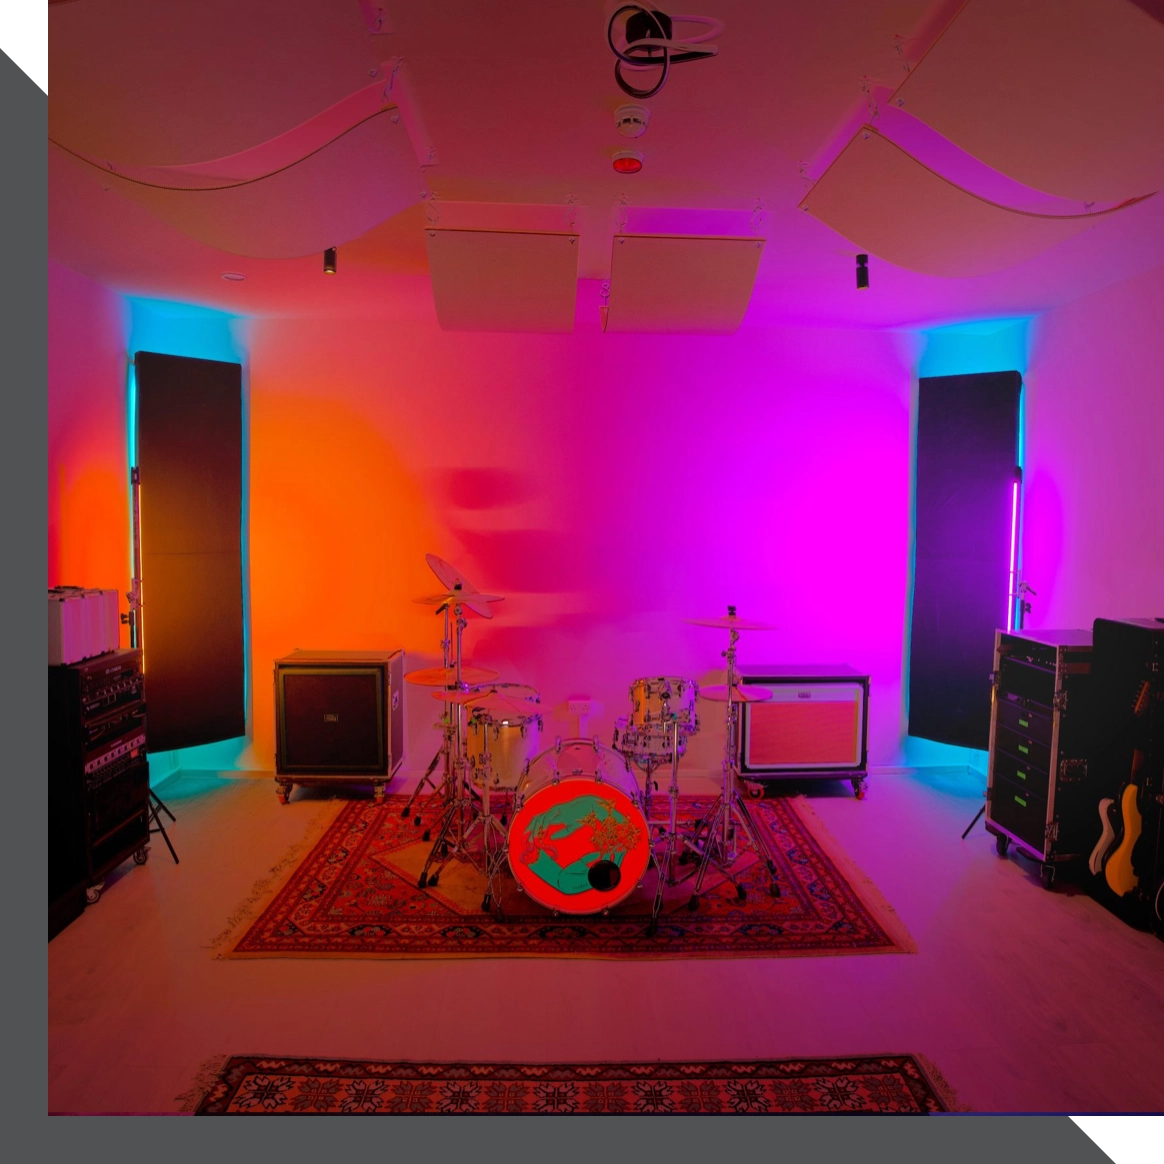 A recording studio in London featuring a drum set with a painted bass drum head at the center, surrounded by amplifiers and sound equipment. The room is illuminated by vibrant colored lights, creating a gradient effect on the walls. Guitars are positioned to the right.